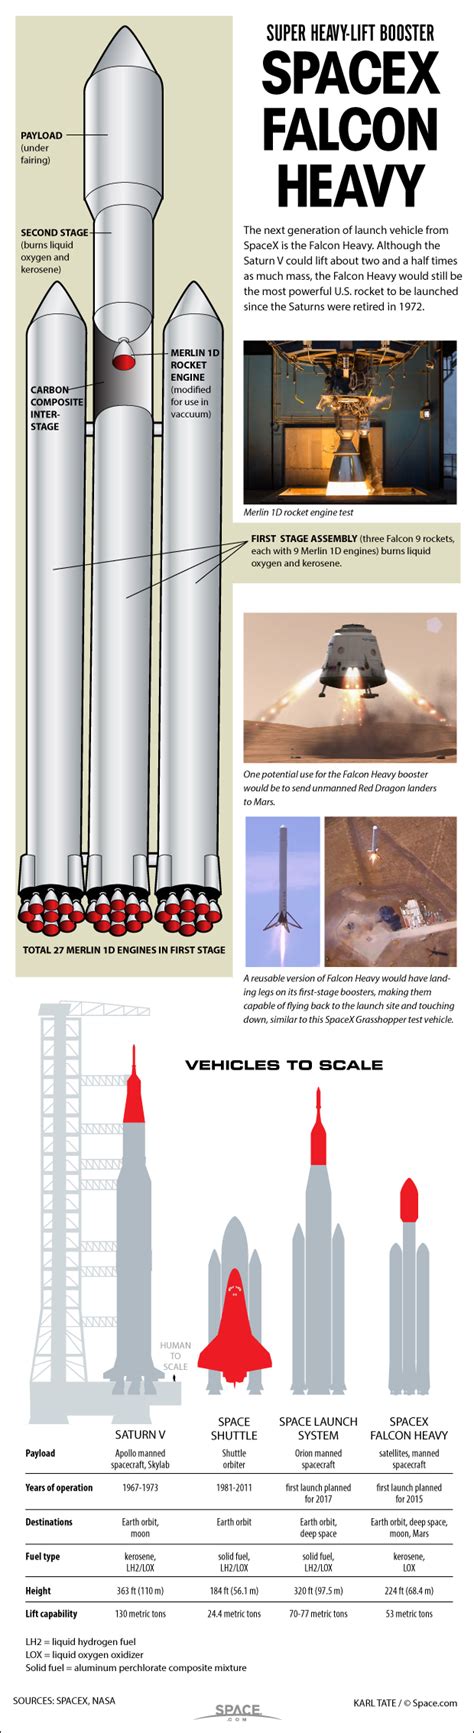 SpaceX S Huge Falcon Heavy Rocket How It Works Infographic Space